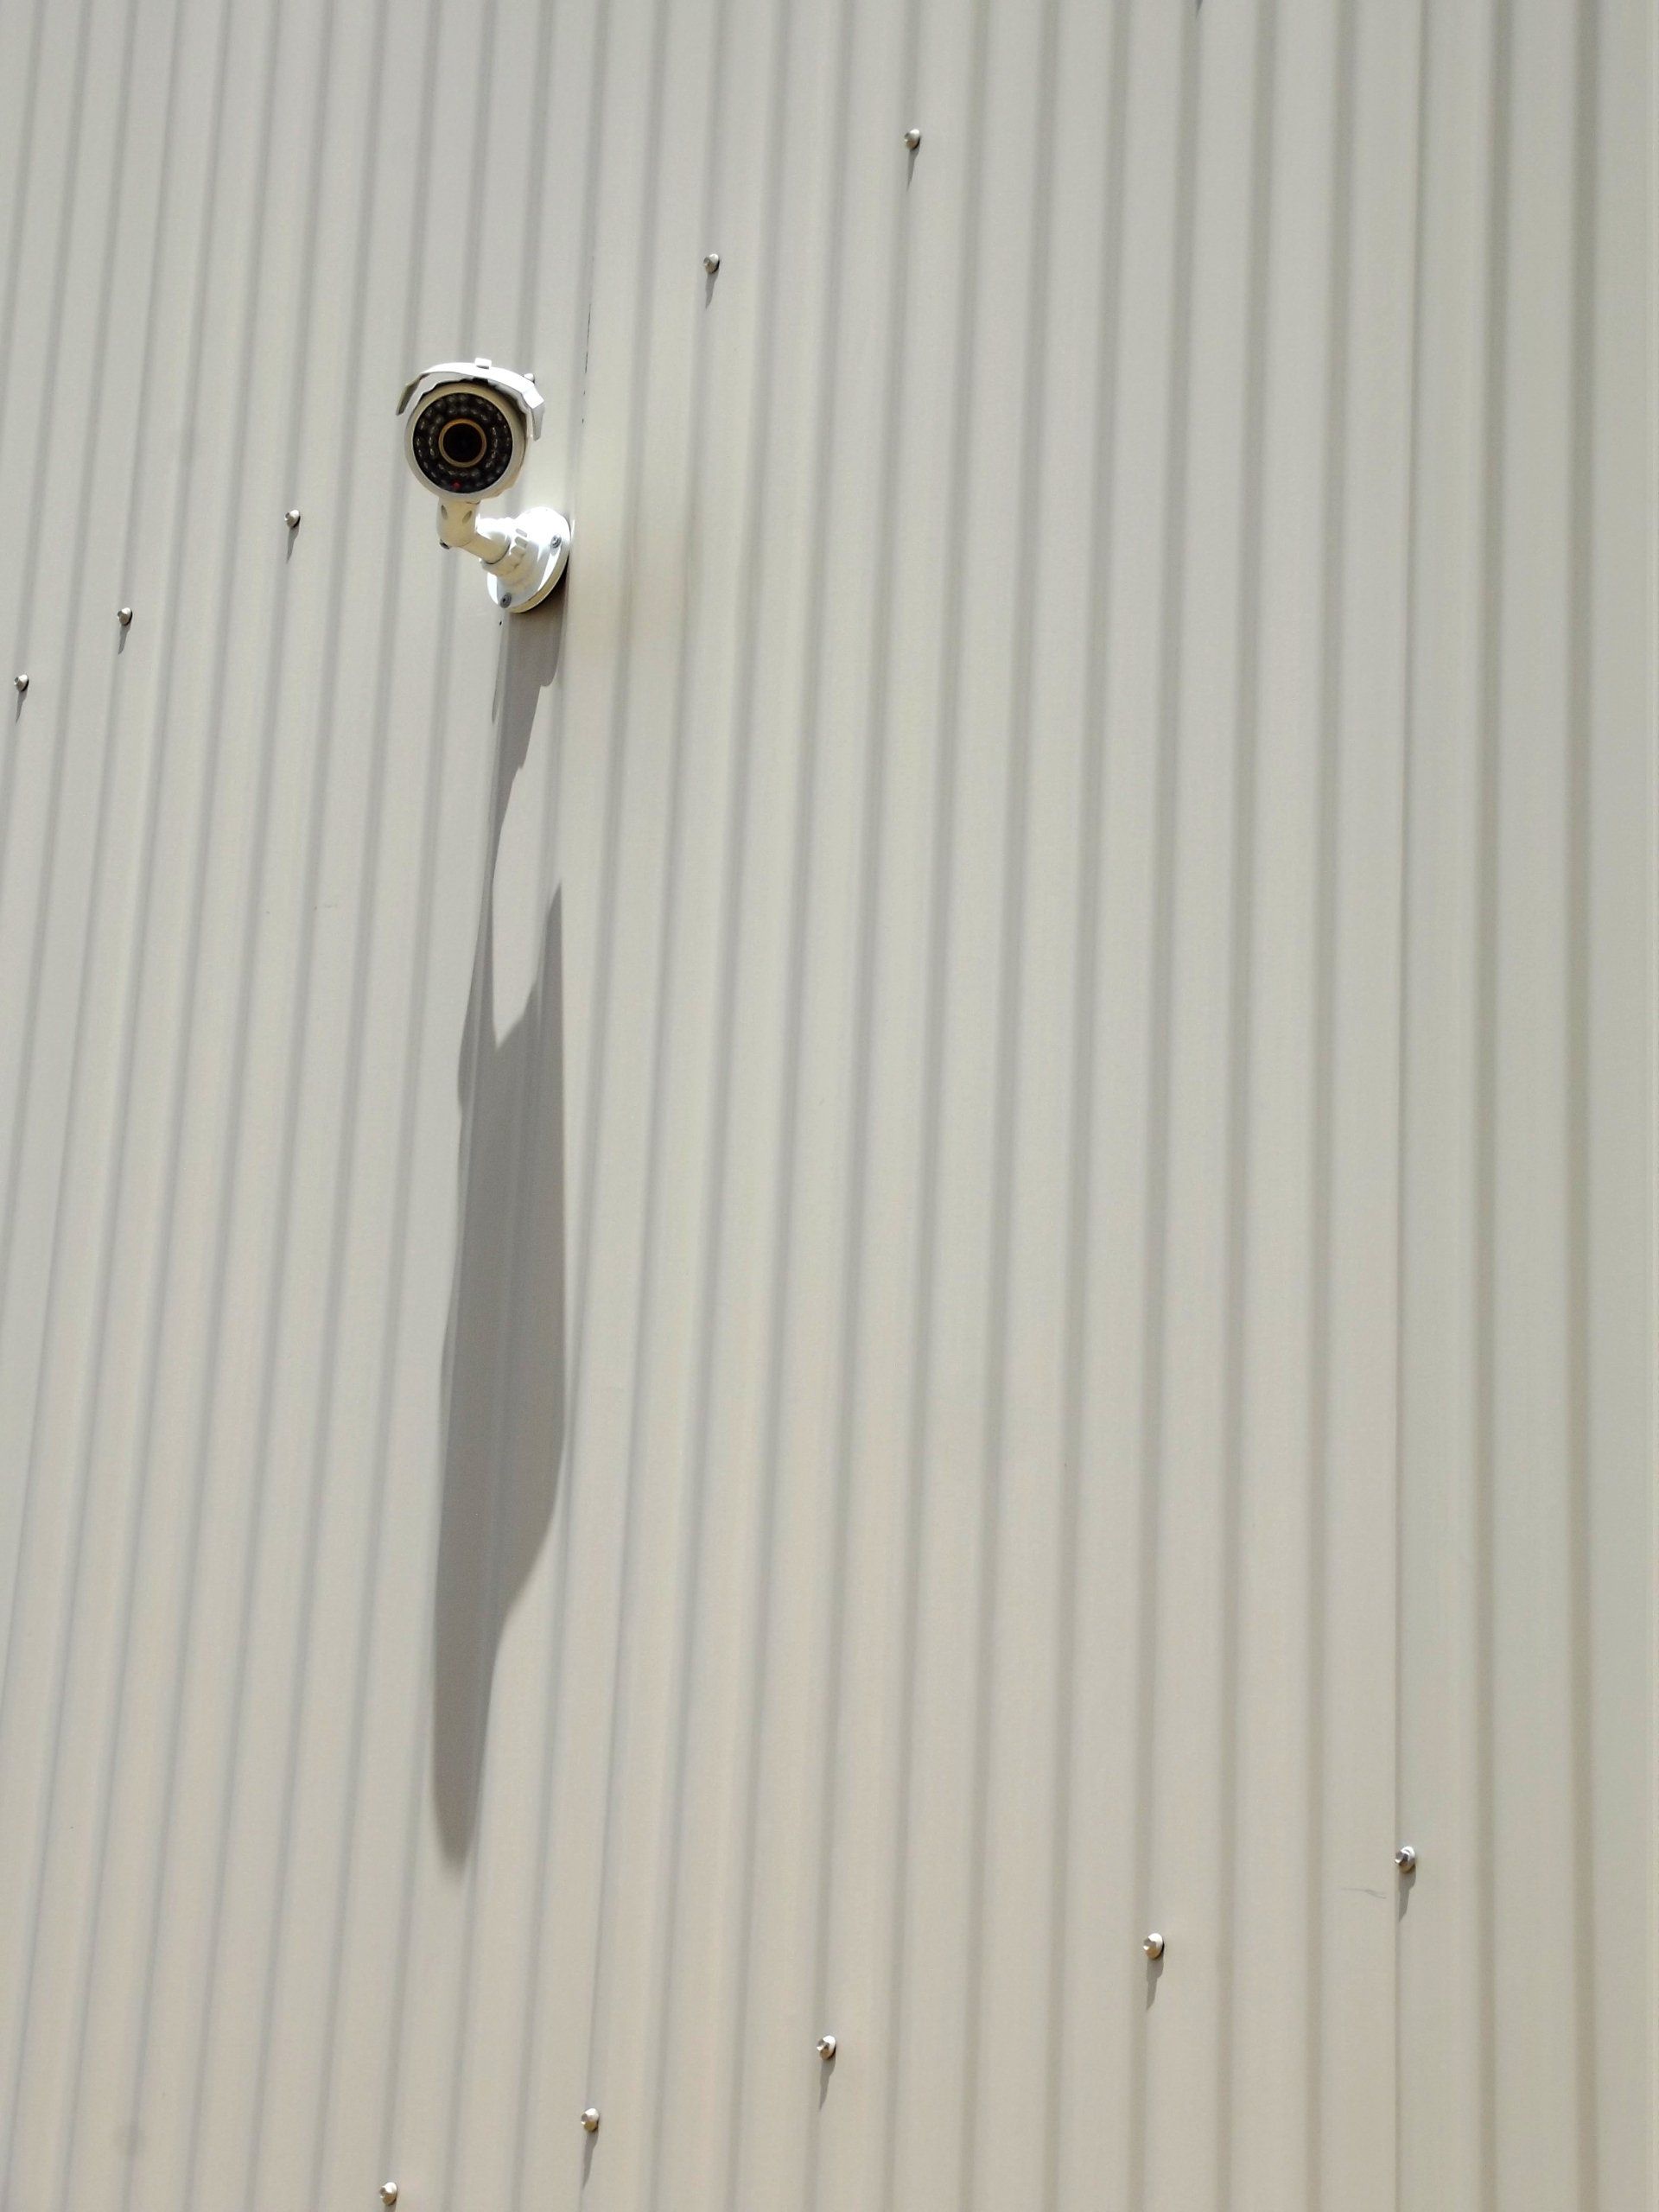 security camera on wall